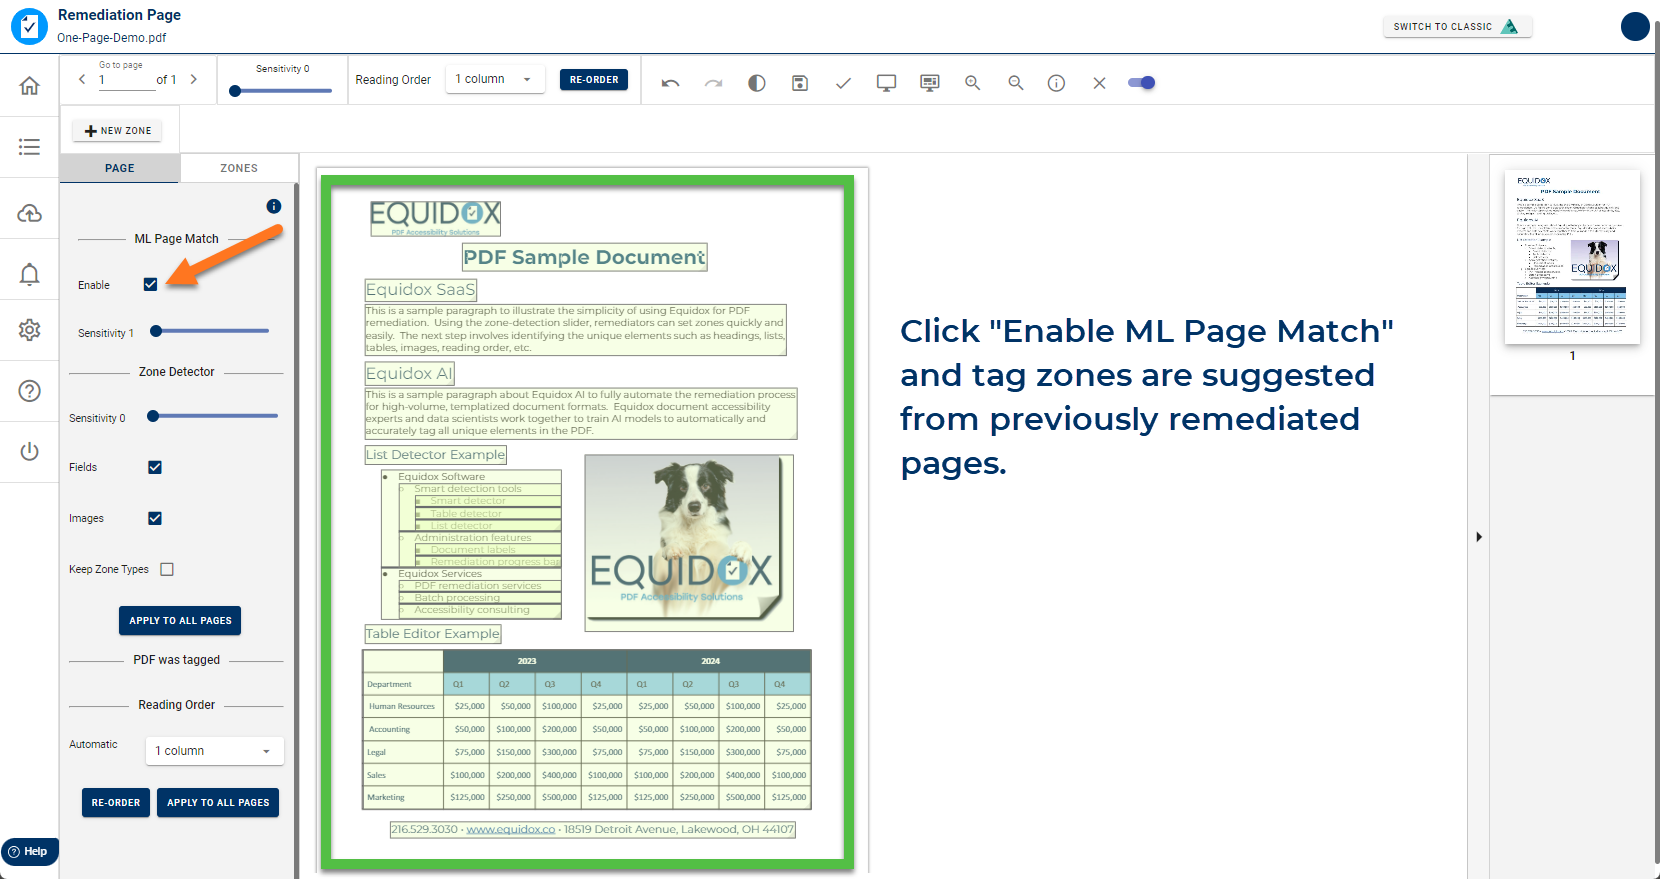 Screenshot of Equidox software Page Match feature, showing the Enable checkbox in the ML Page Match section.